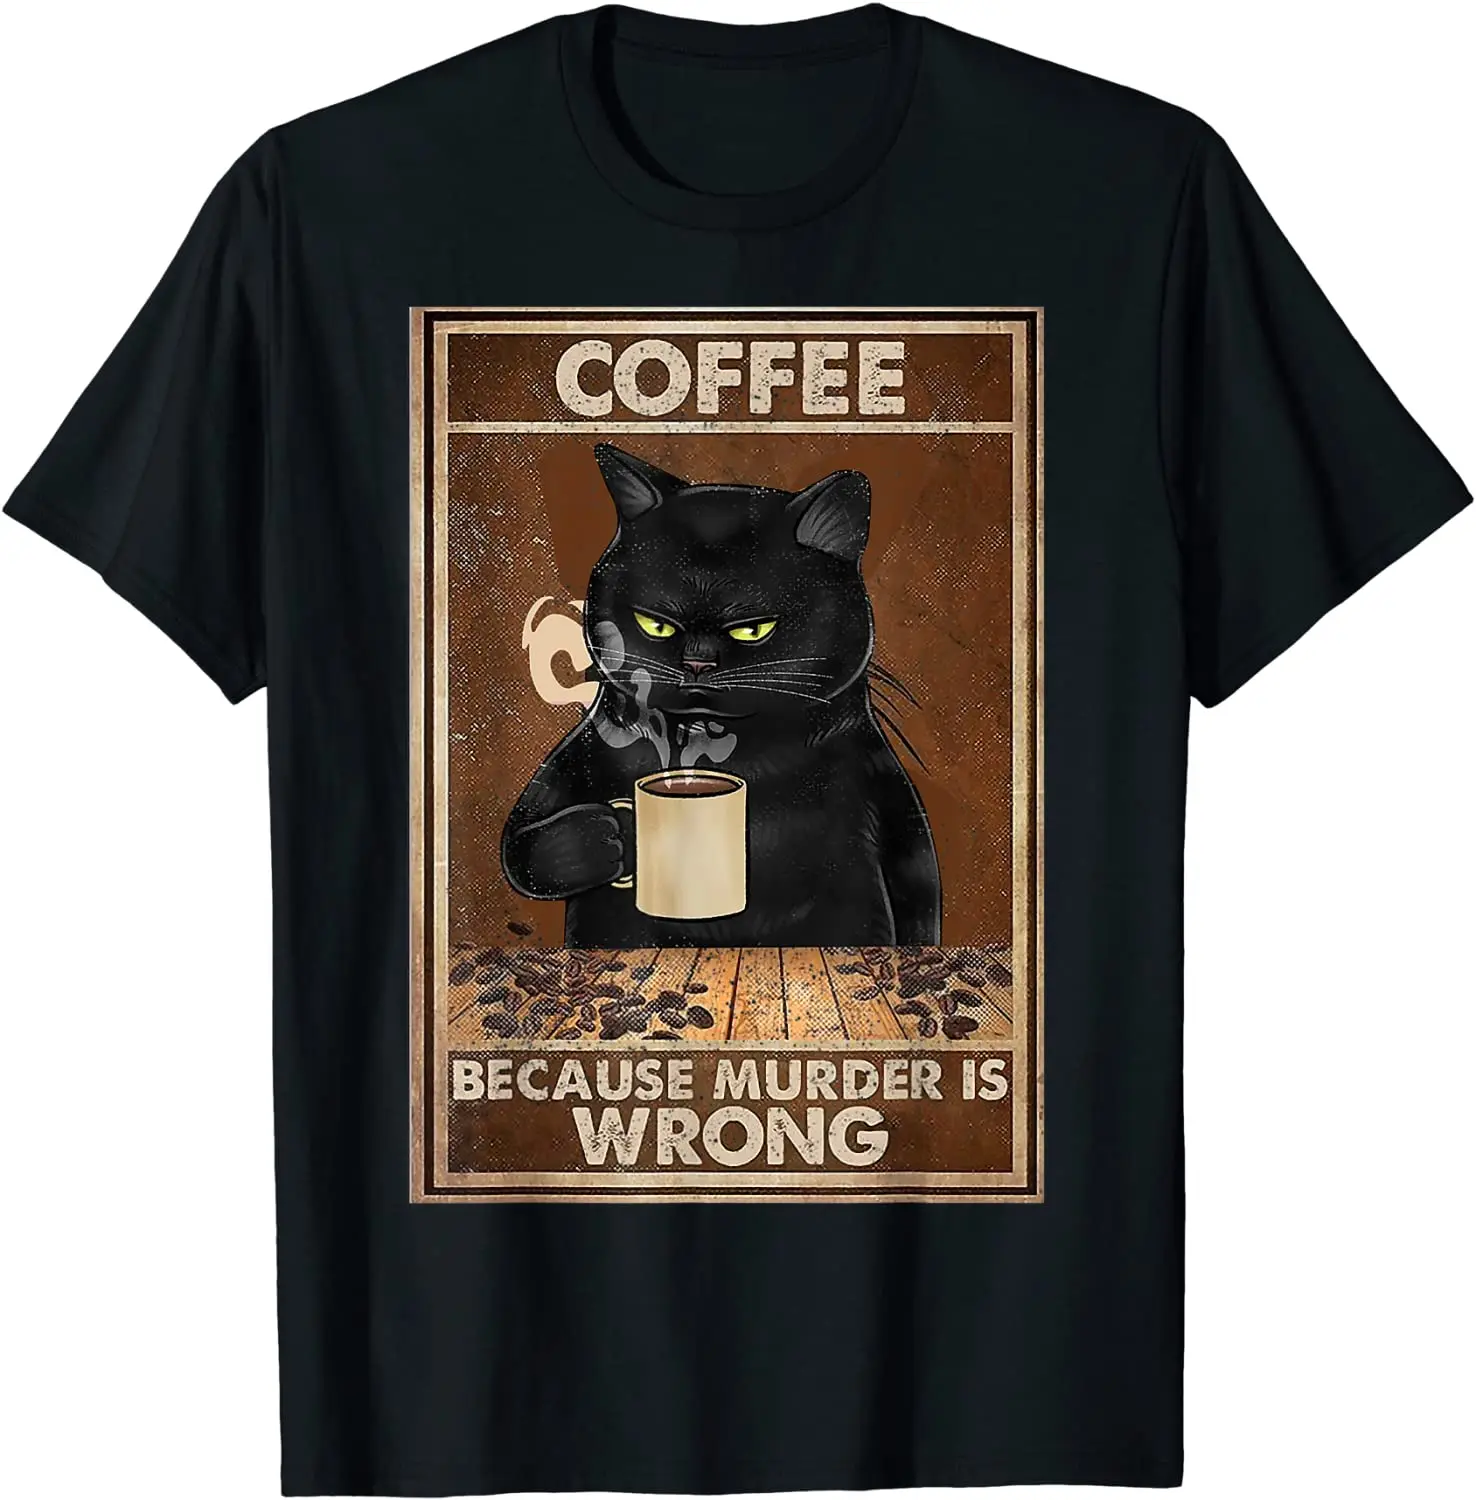 

2023 Coffee Because Murder Is Wrong Black Cat Drinks Coffee Funny Oversized Hip hop T-Shirt Cotton Tops Tees for Men Leisure